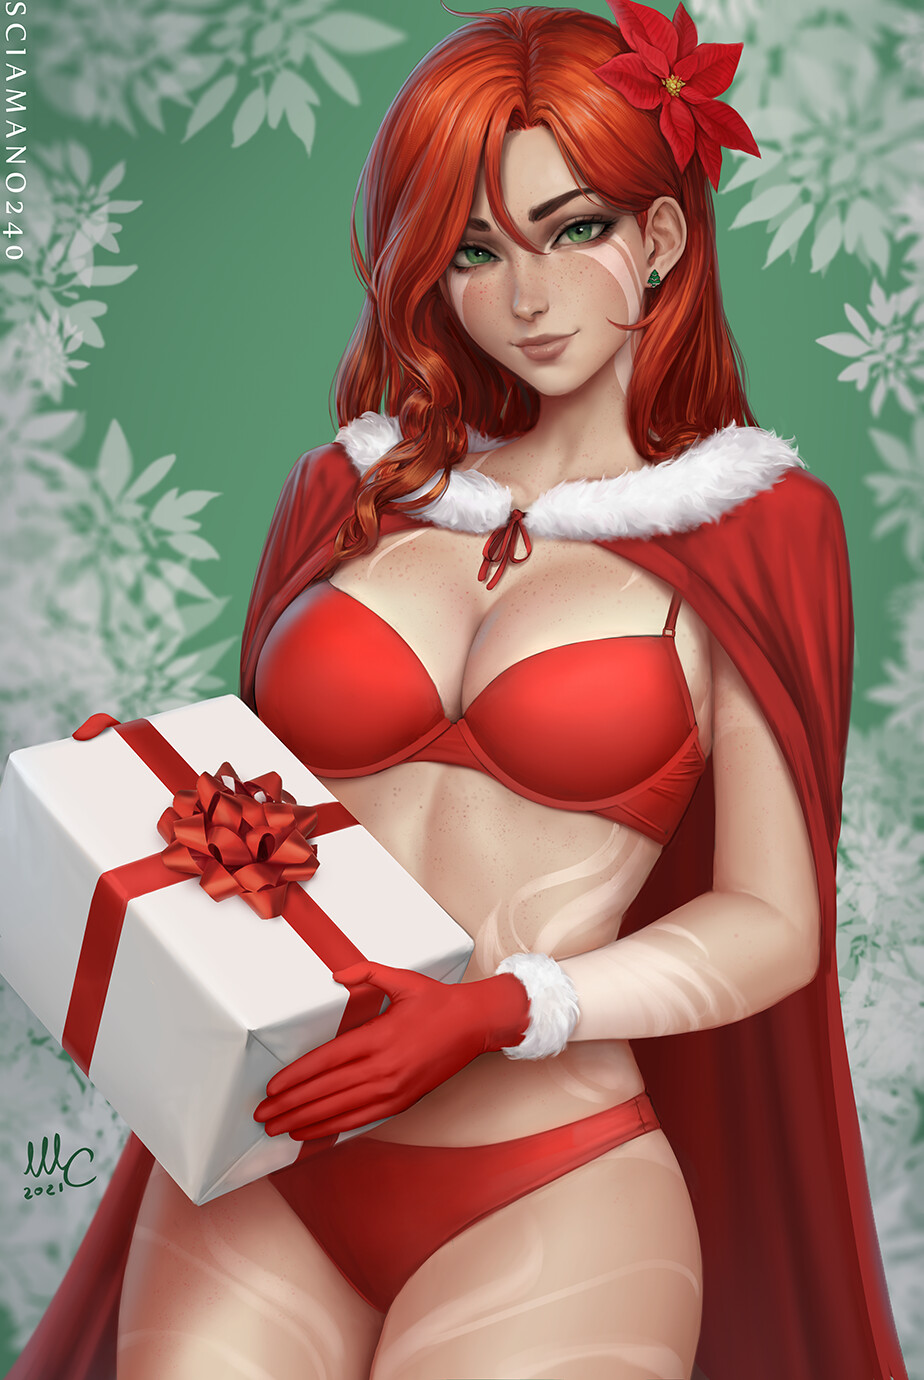 General 924x1380 Mirco Cabbia drawing women Windranger Dota 2 redhead cape lingerie gloves red clothing flower in hair green eyes Christmas presents simple background